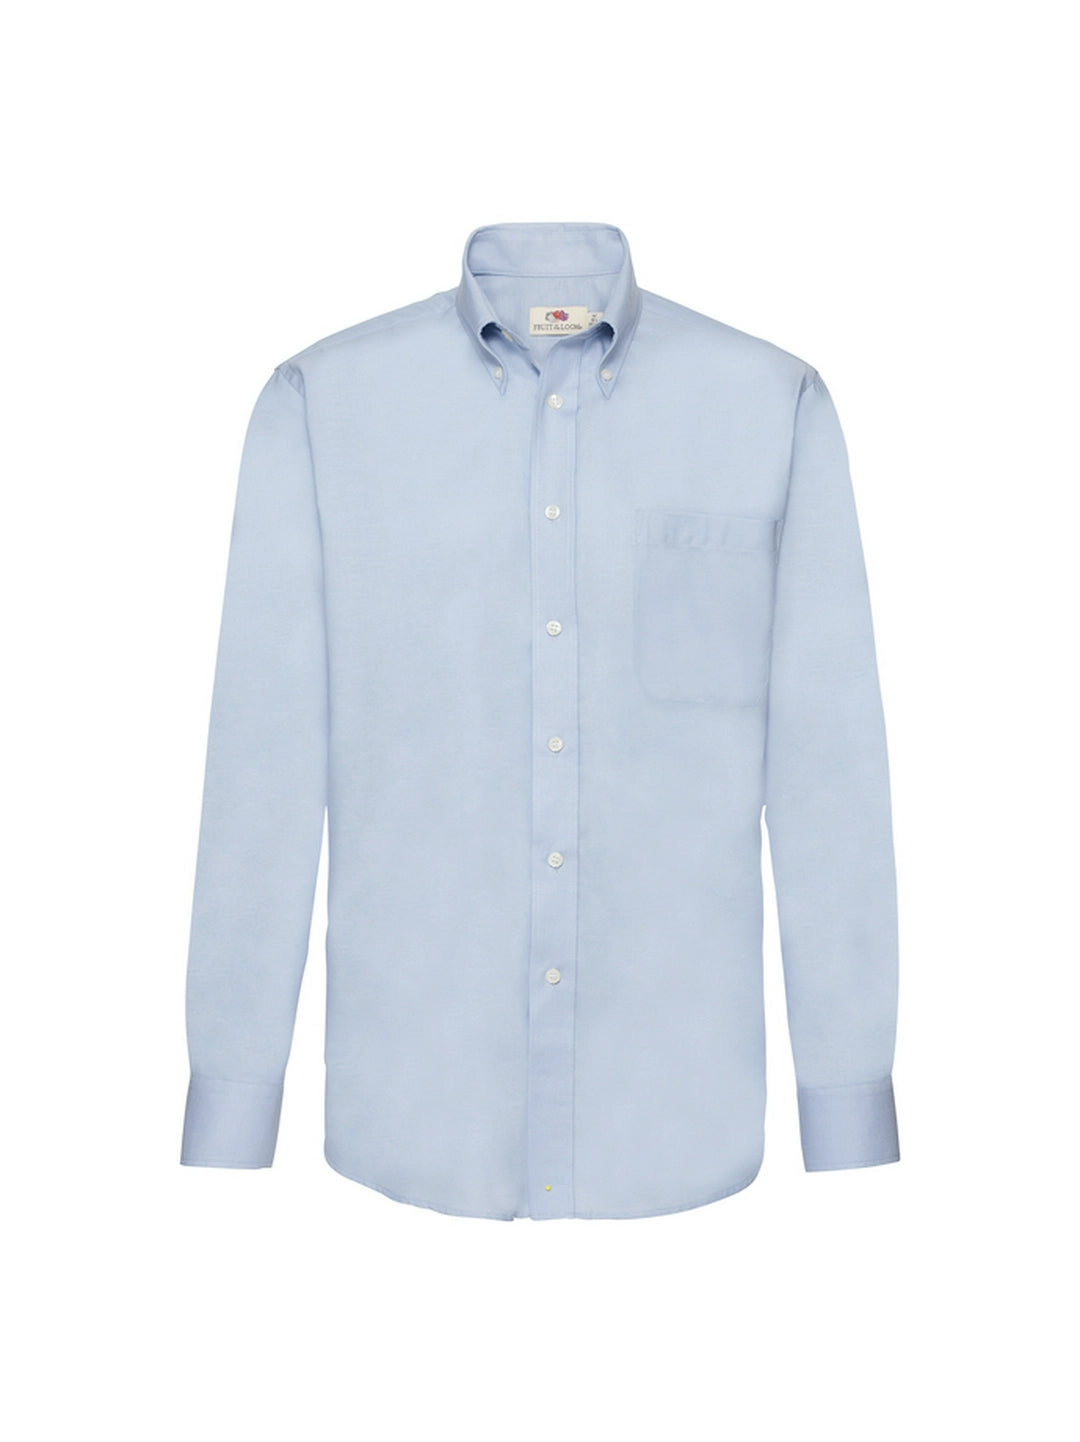 Fruit Of The Loom 65114Mens Oxford Long Sleeve Shirt - COOZO